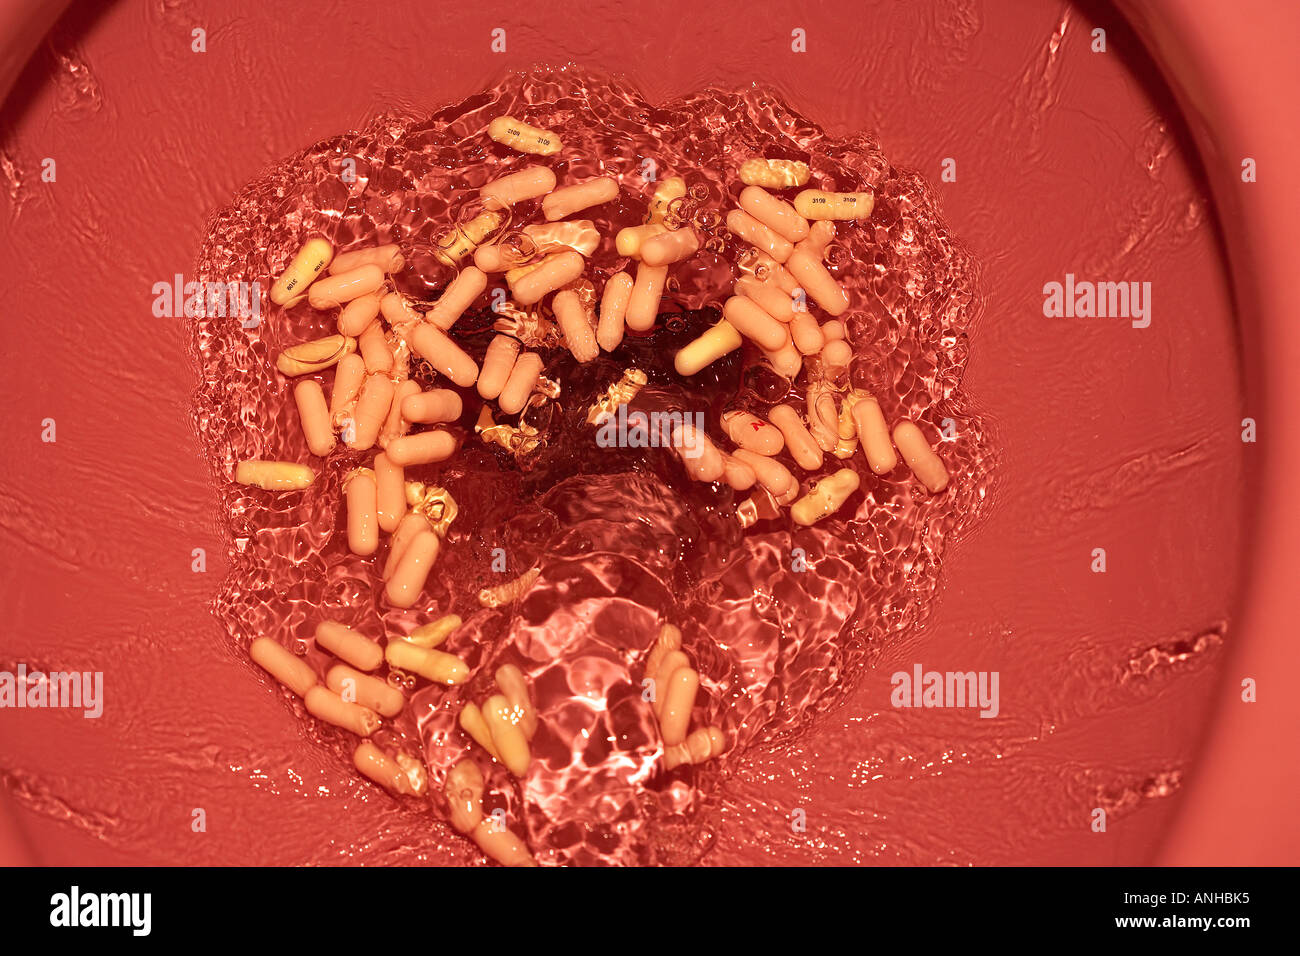 Pills Being Flushed down a Toilet Stock Photo